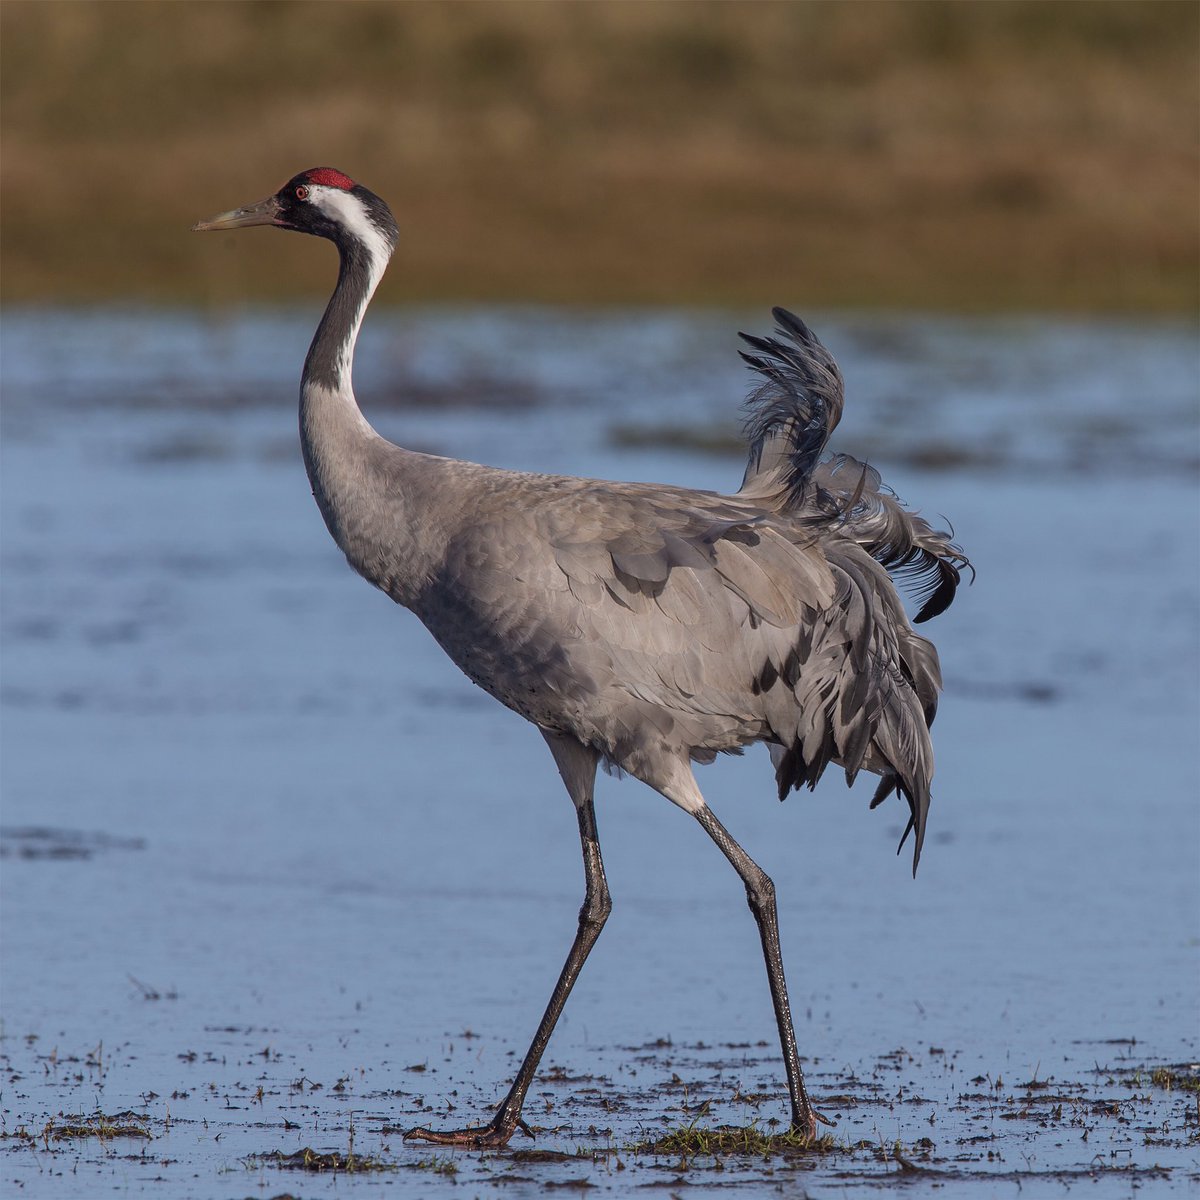 Crane extinct 1542 recolonised Broads Norfolk 1981going to see them in mid 1980s when it was still fairly secret was thrilling https://www.researchgate.net/profile/Andrew_Stanbury/publication/289908650_The_changing_status_of_the_common_crane_in_the_UK/links/5c8f6102a6fdcc38175a9303/The-changing-status-of-the-common-crane-in-the-UK.pdf?origin=publication_detail